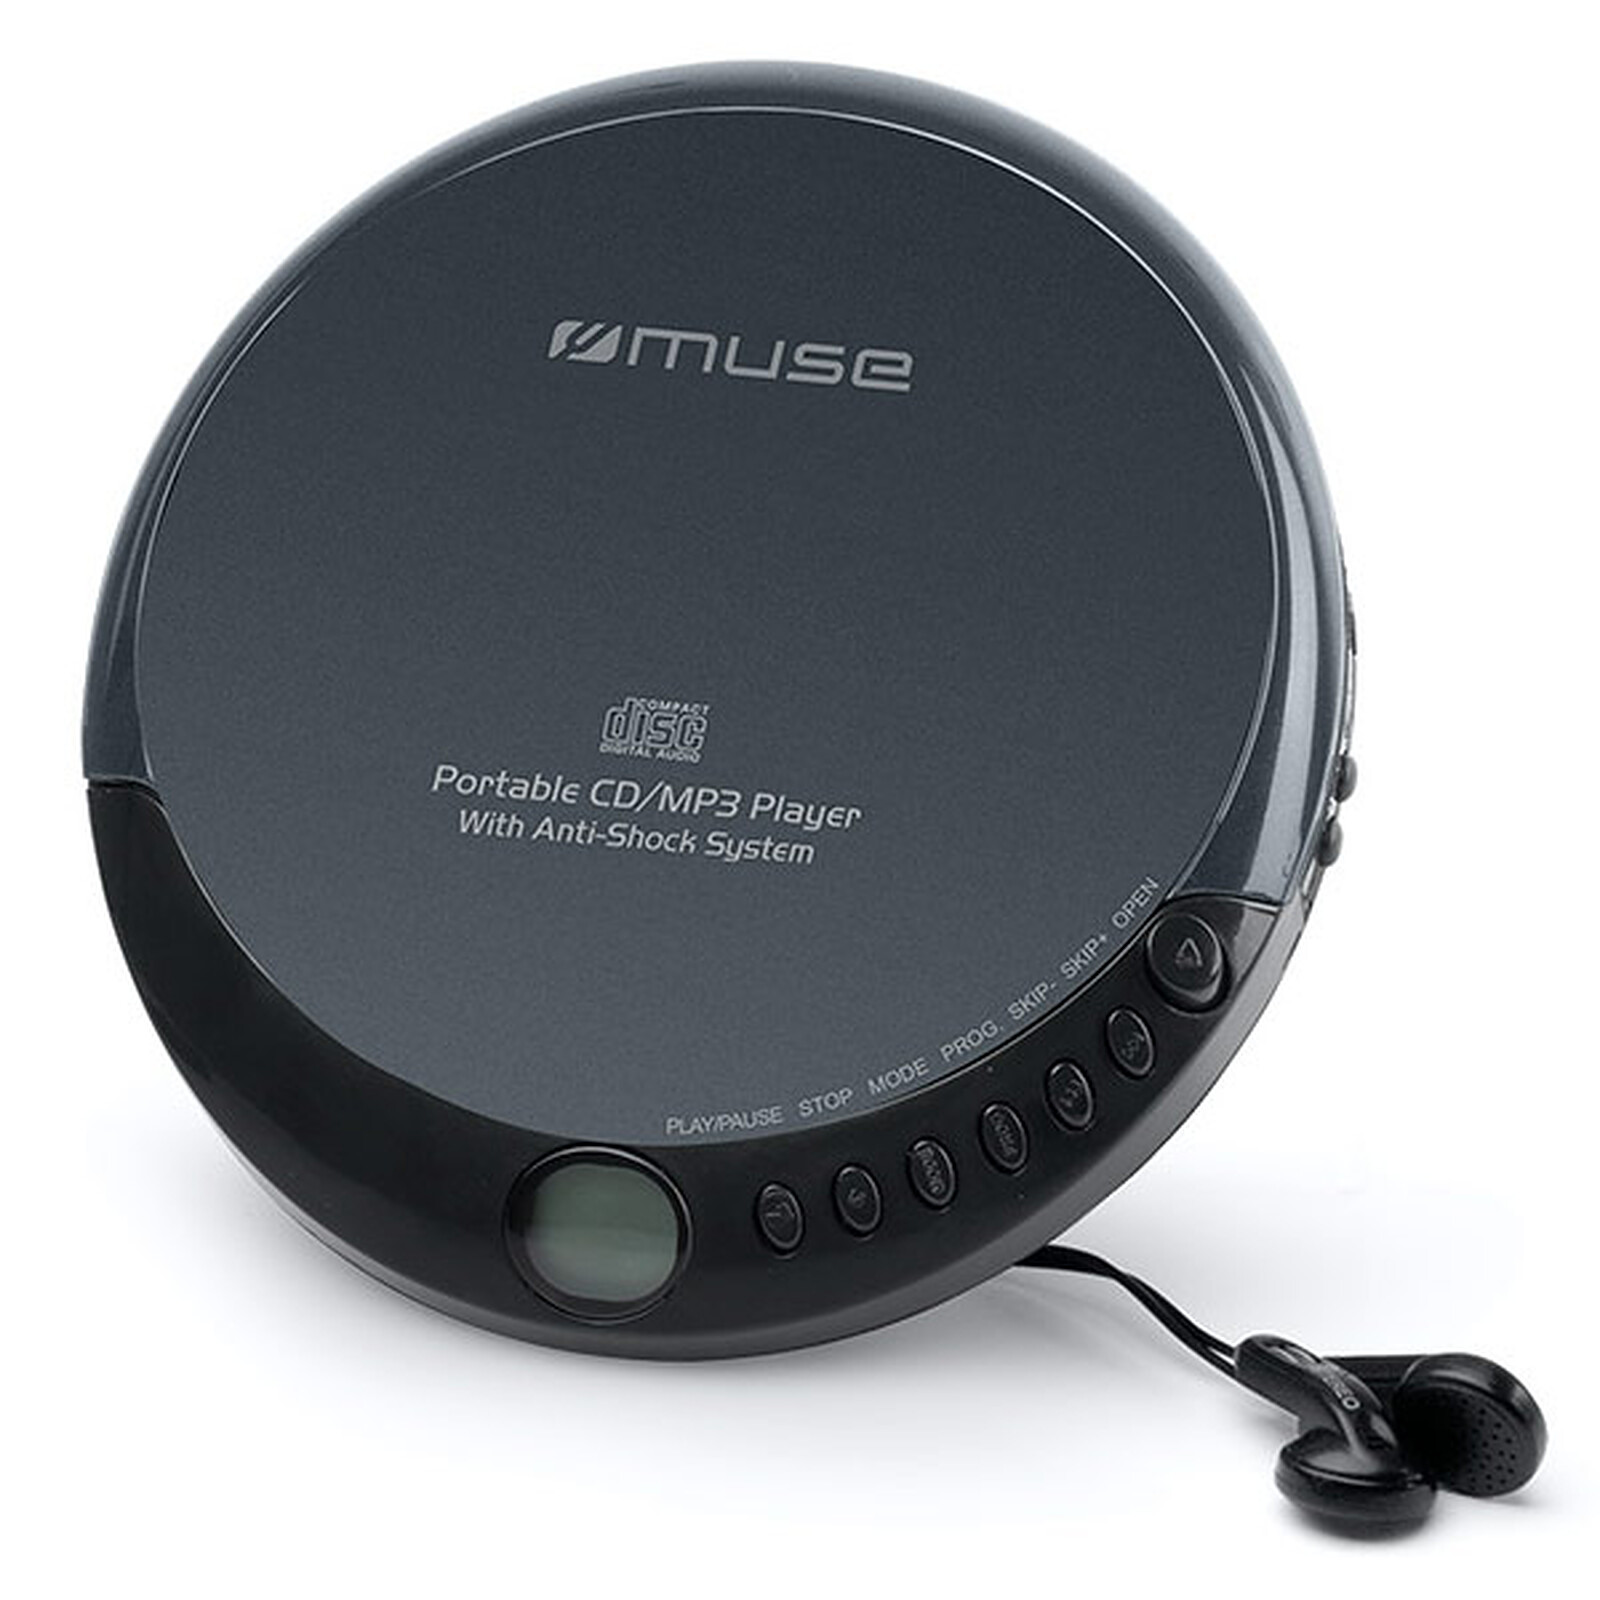 Muse M-900 DM - CD player - LDLC 3-year warranty